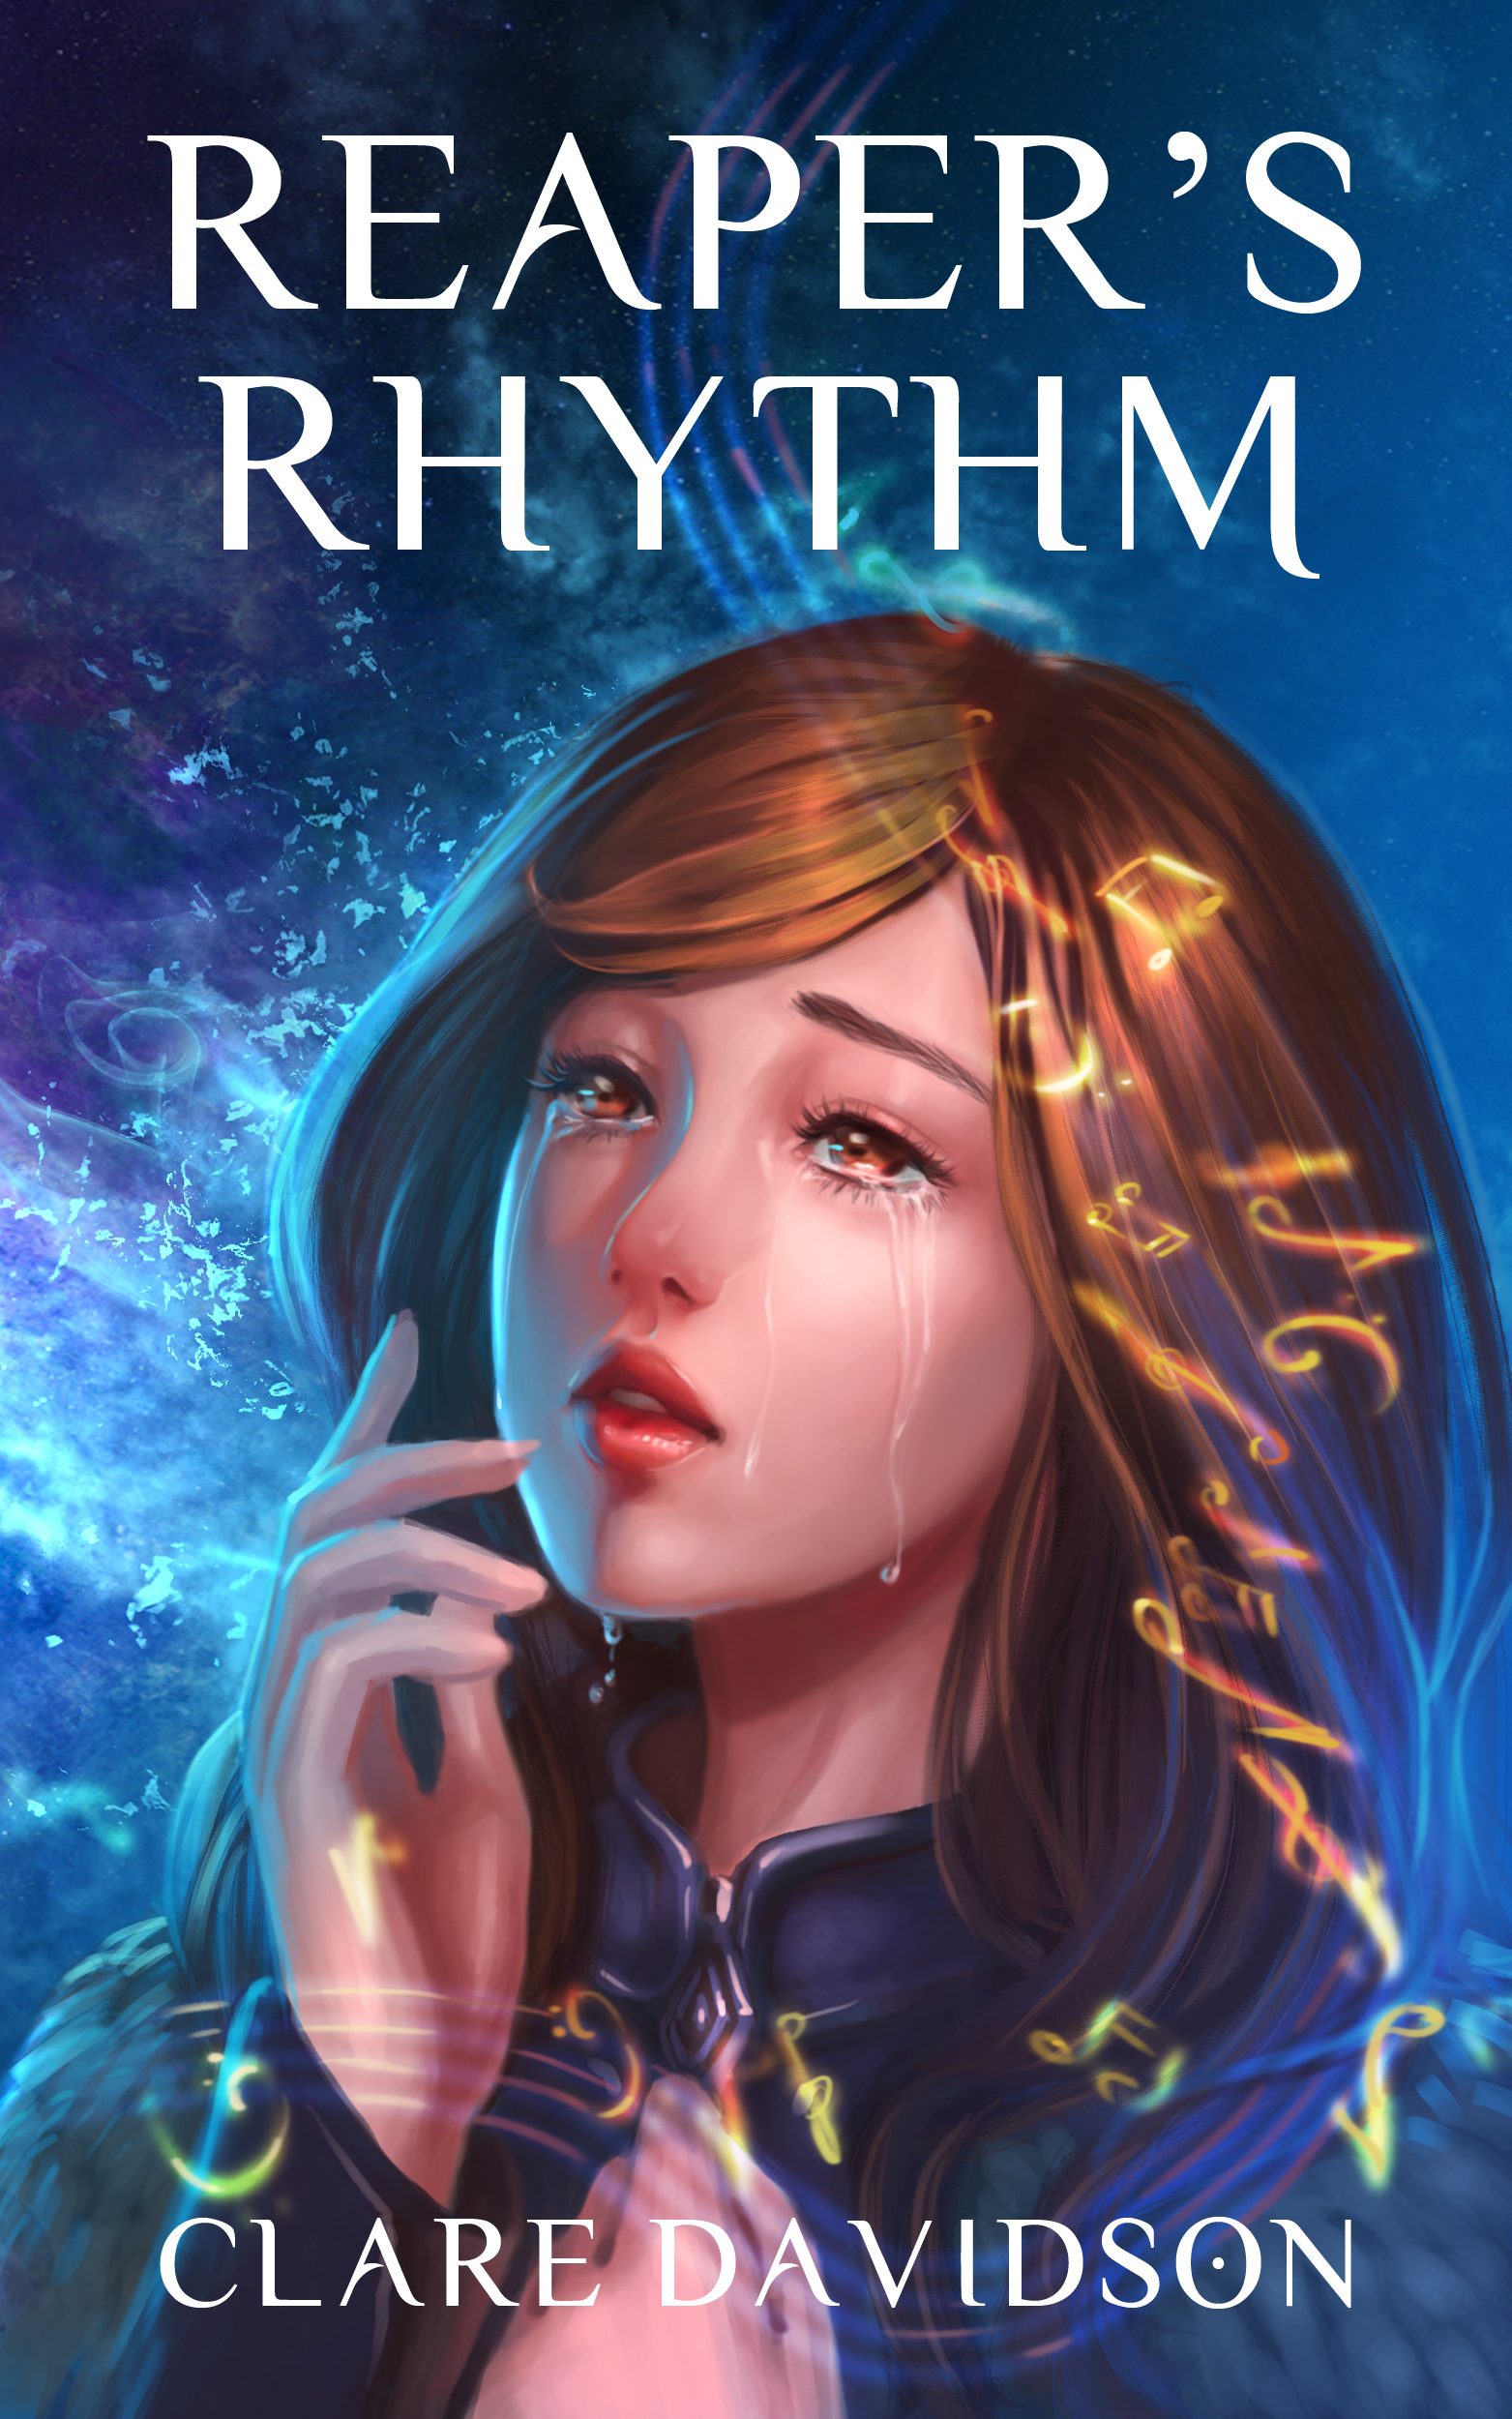 Reaper's Rhythm by Clare Davidson